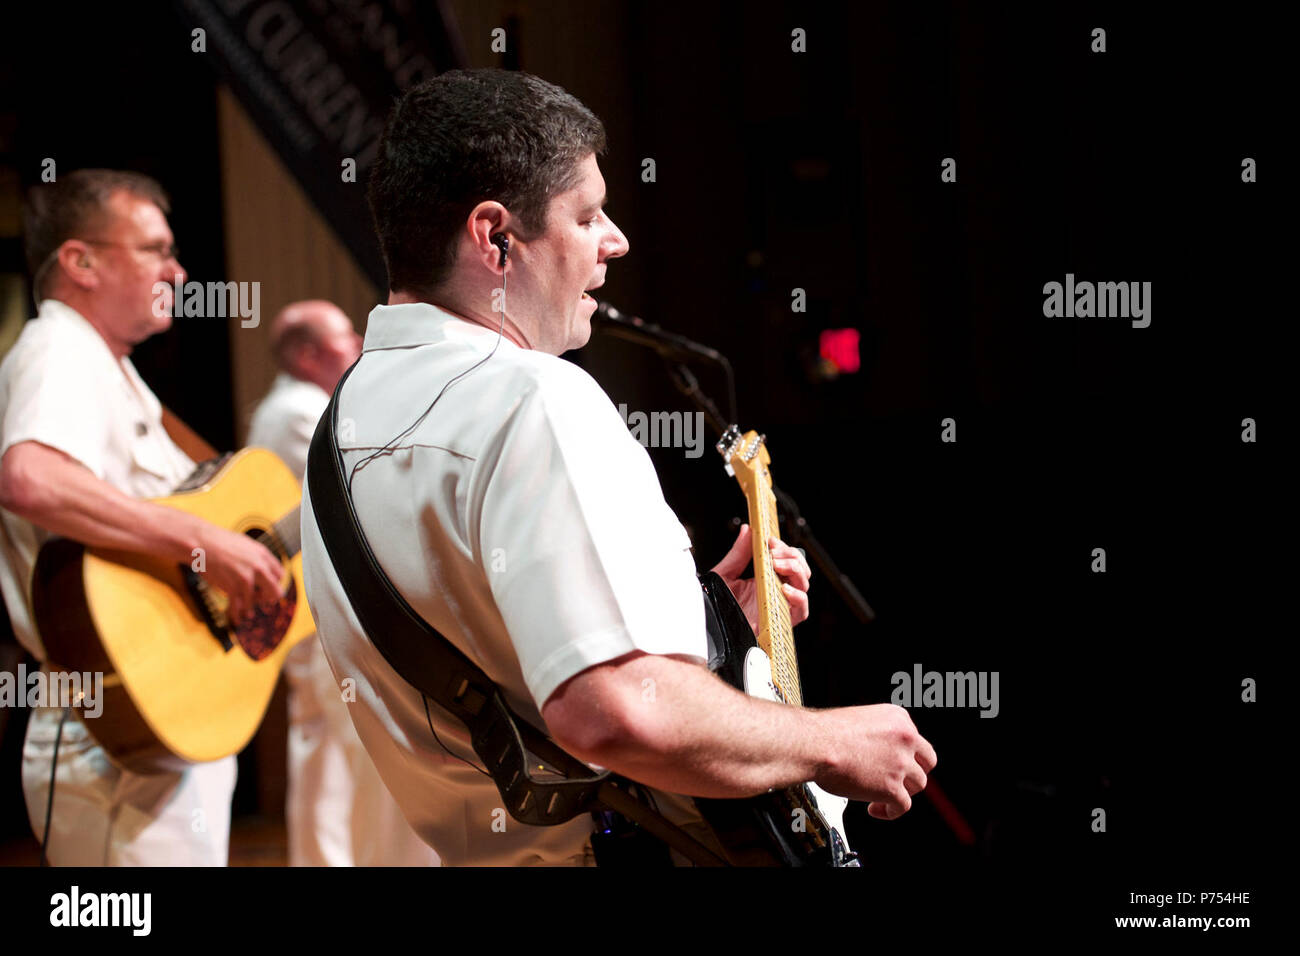 ABERDEEN, S.D. (Sept. 4, 2015) Musician 1st Class Joe Friedman performs with the U.S. Navy Band Country Current at the Aberdeen Civic Theater in Aberdeen, S.D. The Navy Band's tour featured 14 performances in six states, reaching out to communities that don't normally see the Navy at work. Stock Photo